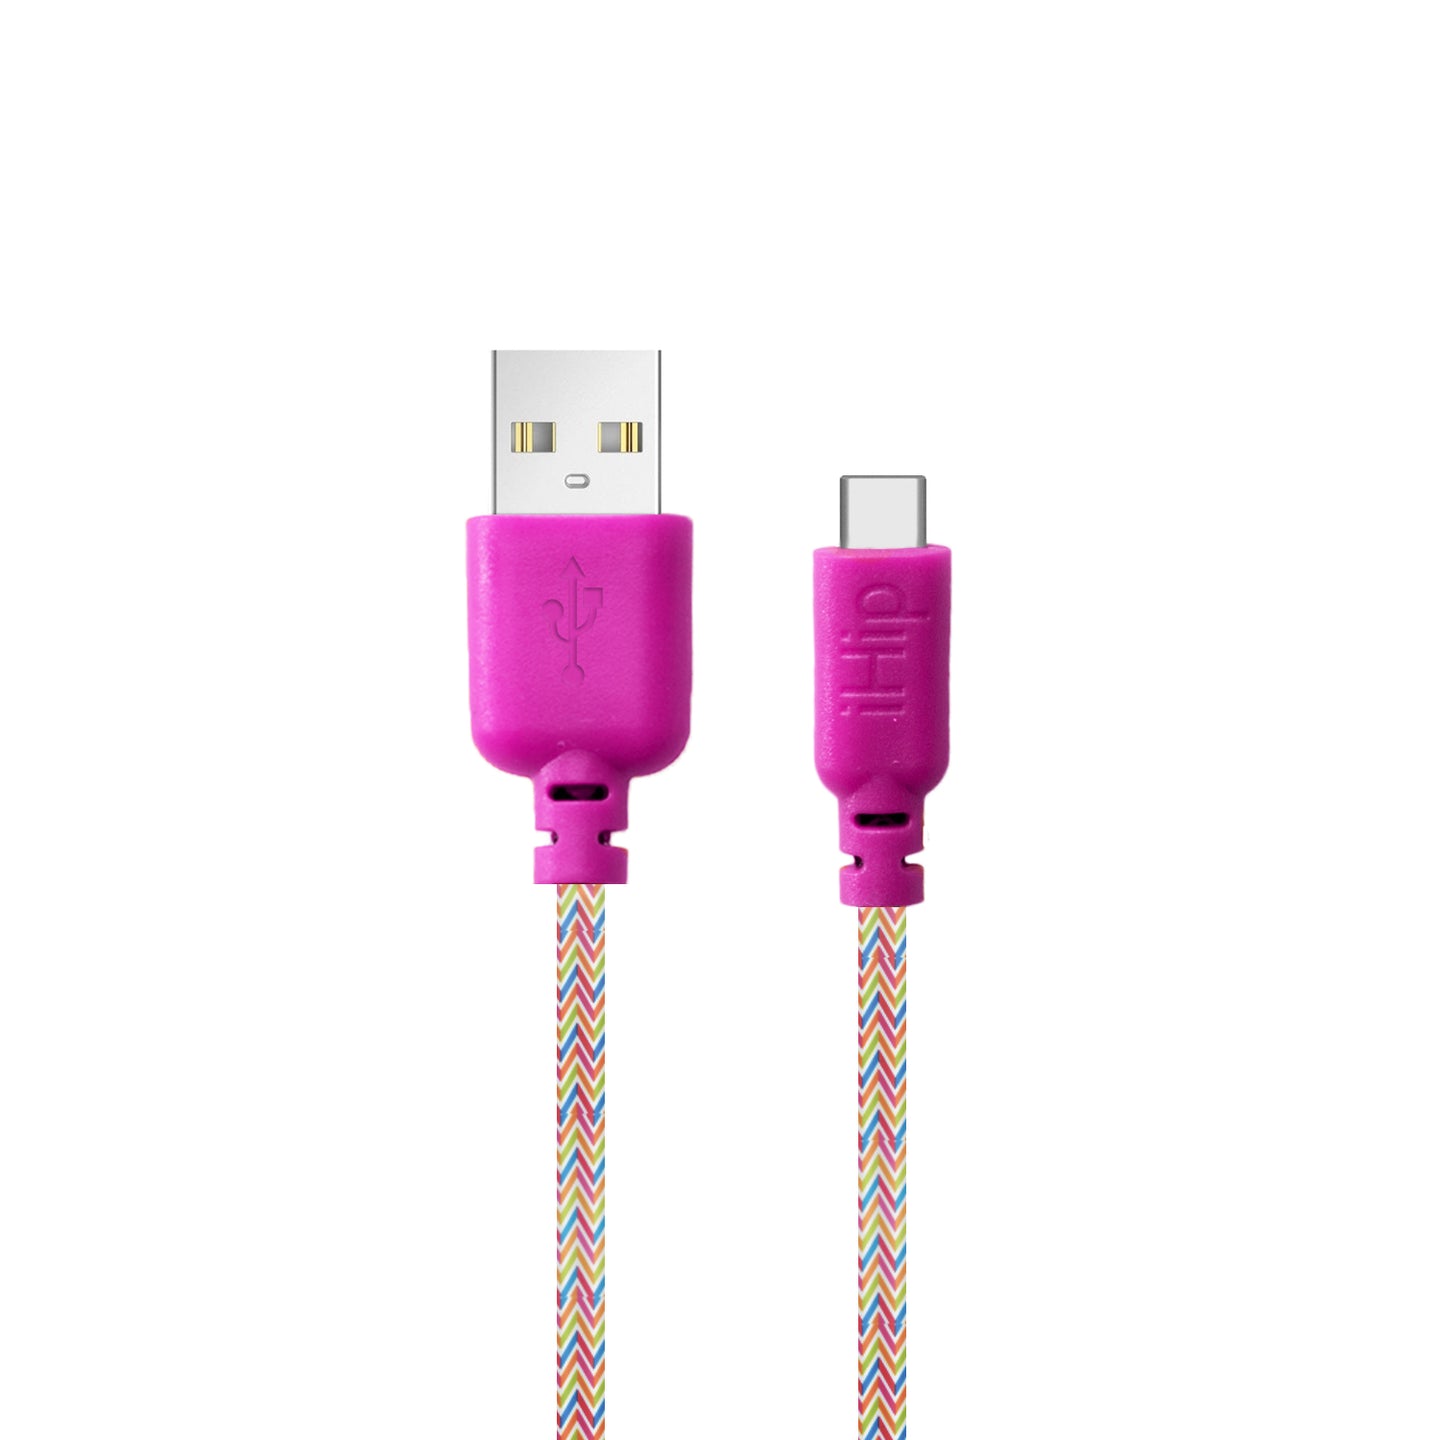 iHip Cute Cords 10ft Rainbow Braided Cable Type-C  USB Sync Fiber Finish Bend Test Certified -Android Charger Cable for Android Samsung Galaxy S9 S10 S8 Plus Note10 9 8, Moto Z, Google Pixel, LG - iHip